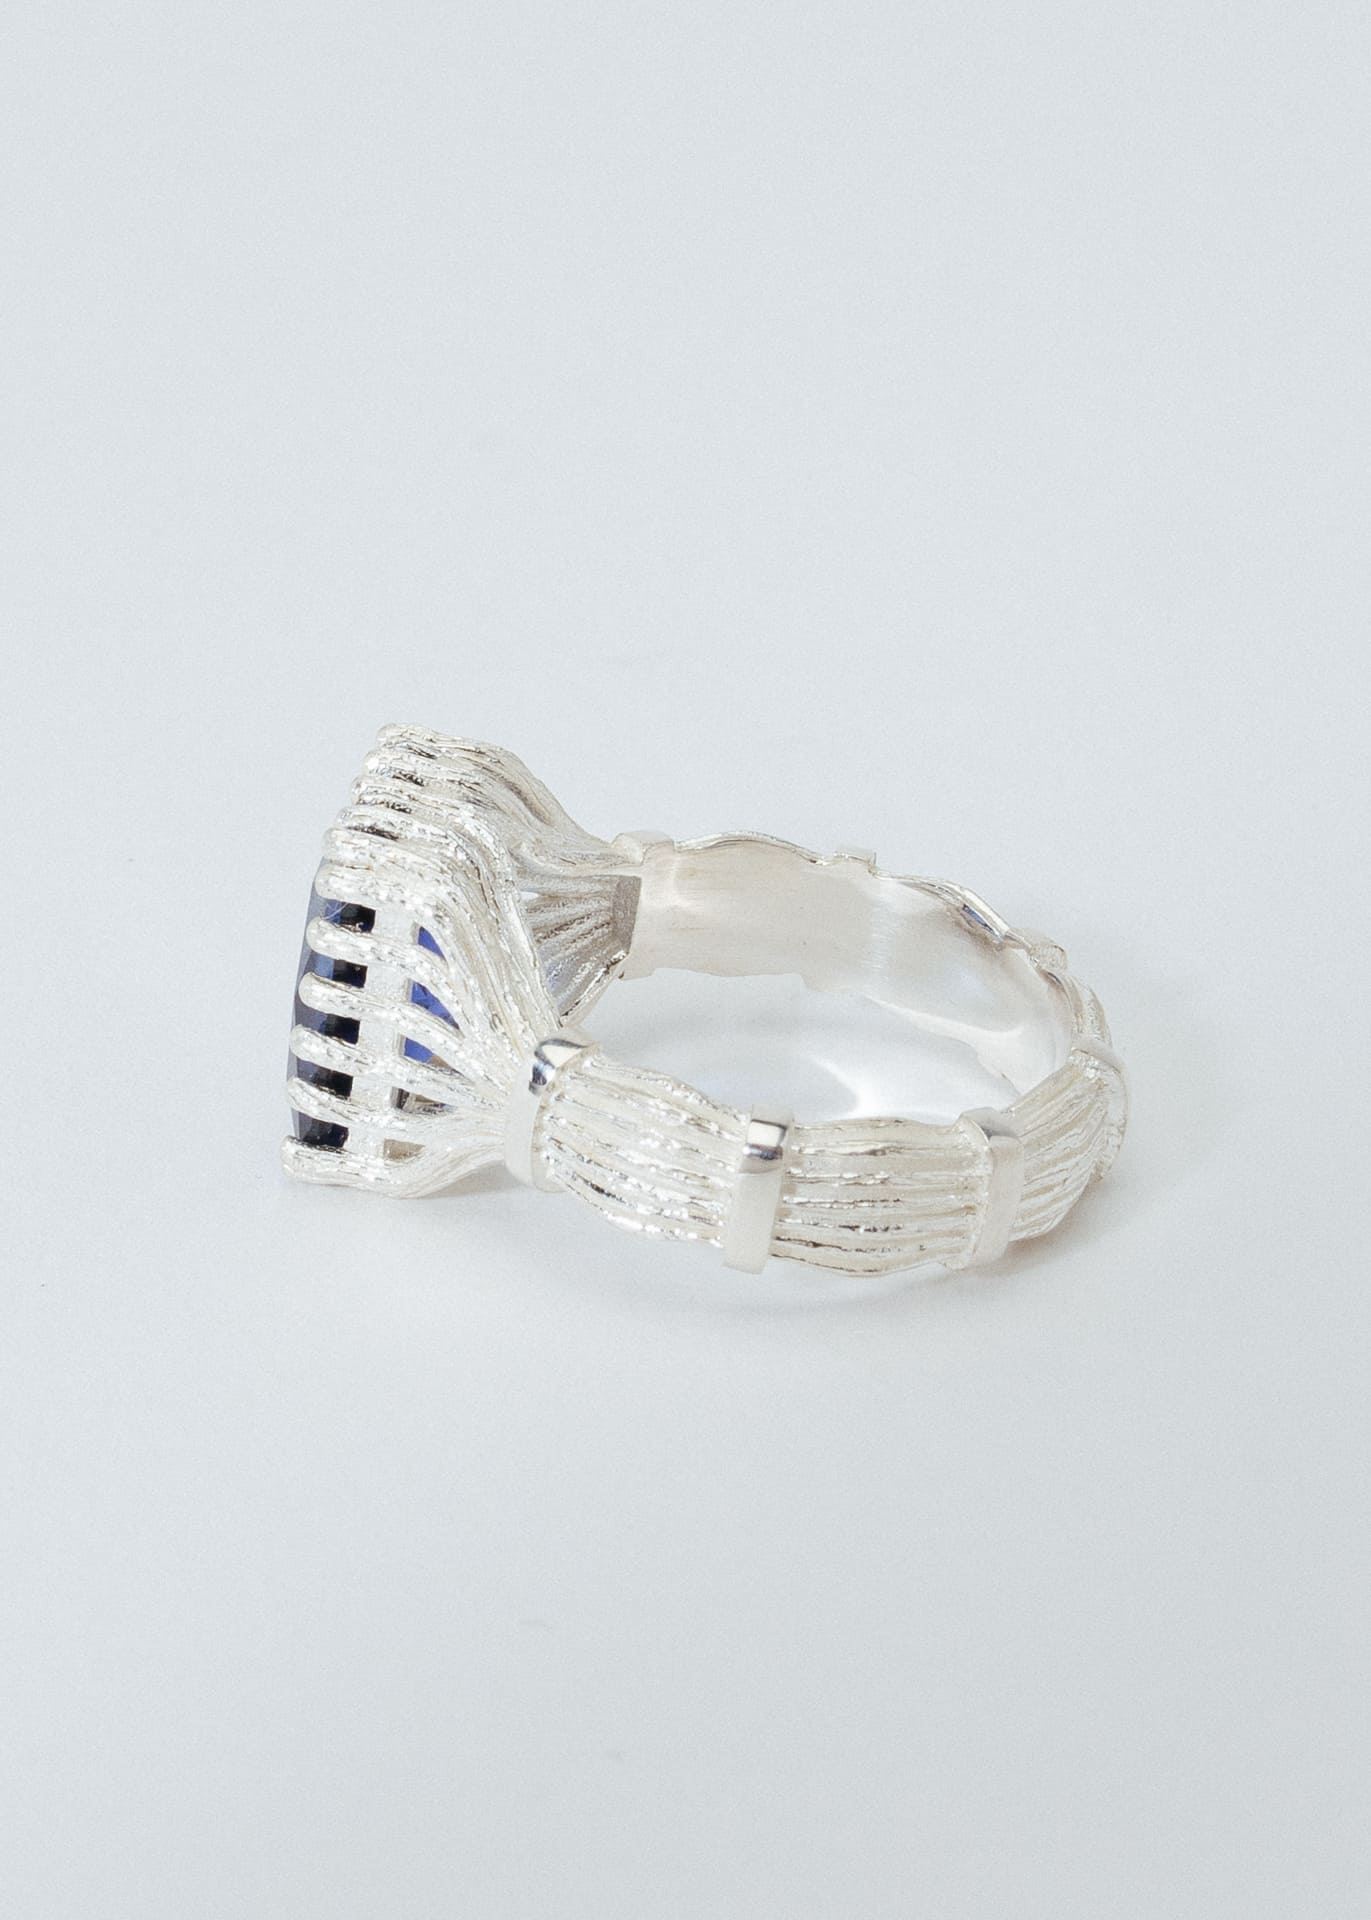 B213_Baguette Cut Bound Willow Ring_L_04